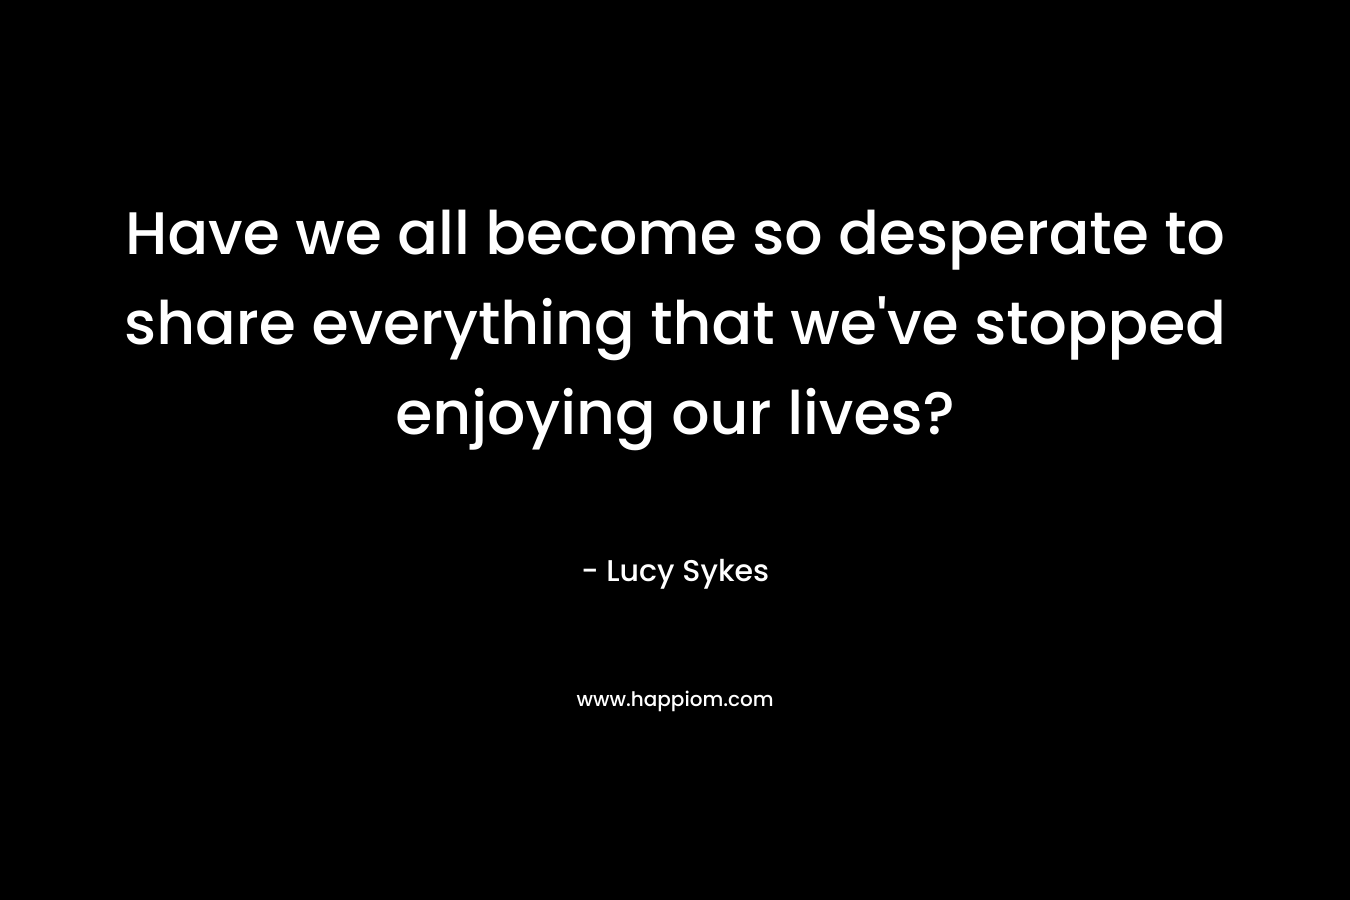 Have we all become so desperate to share everything that we’ve stopped enjoying our lives? – Lucy Sykes